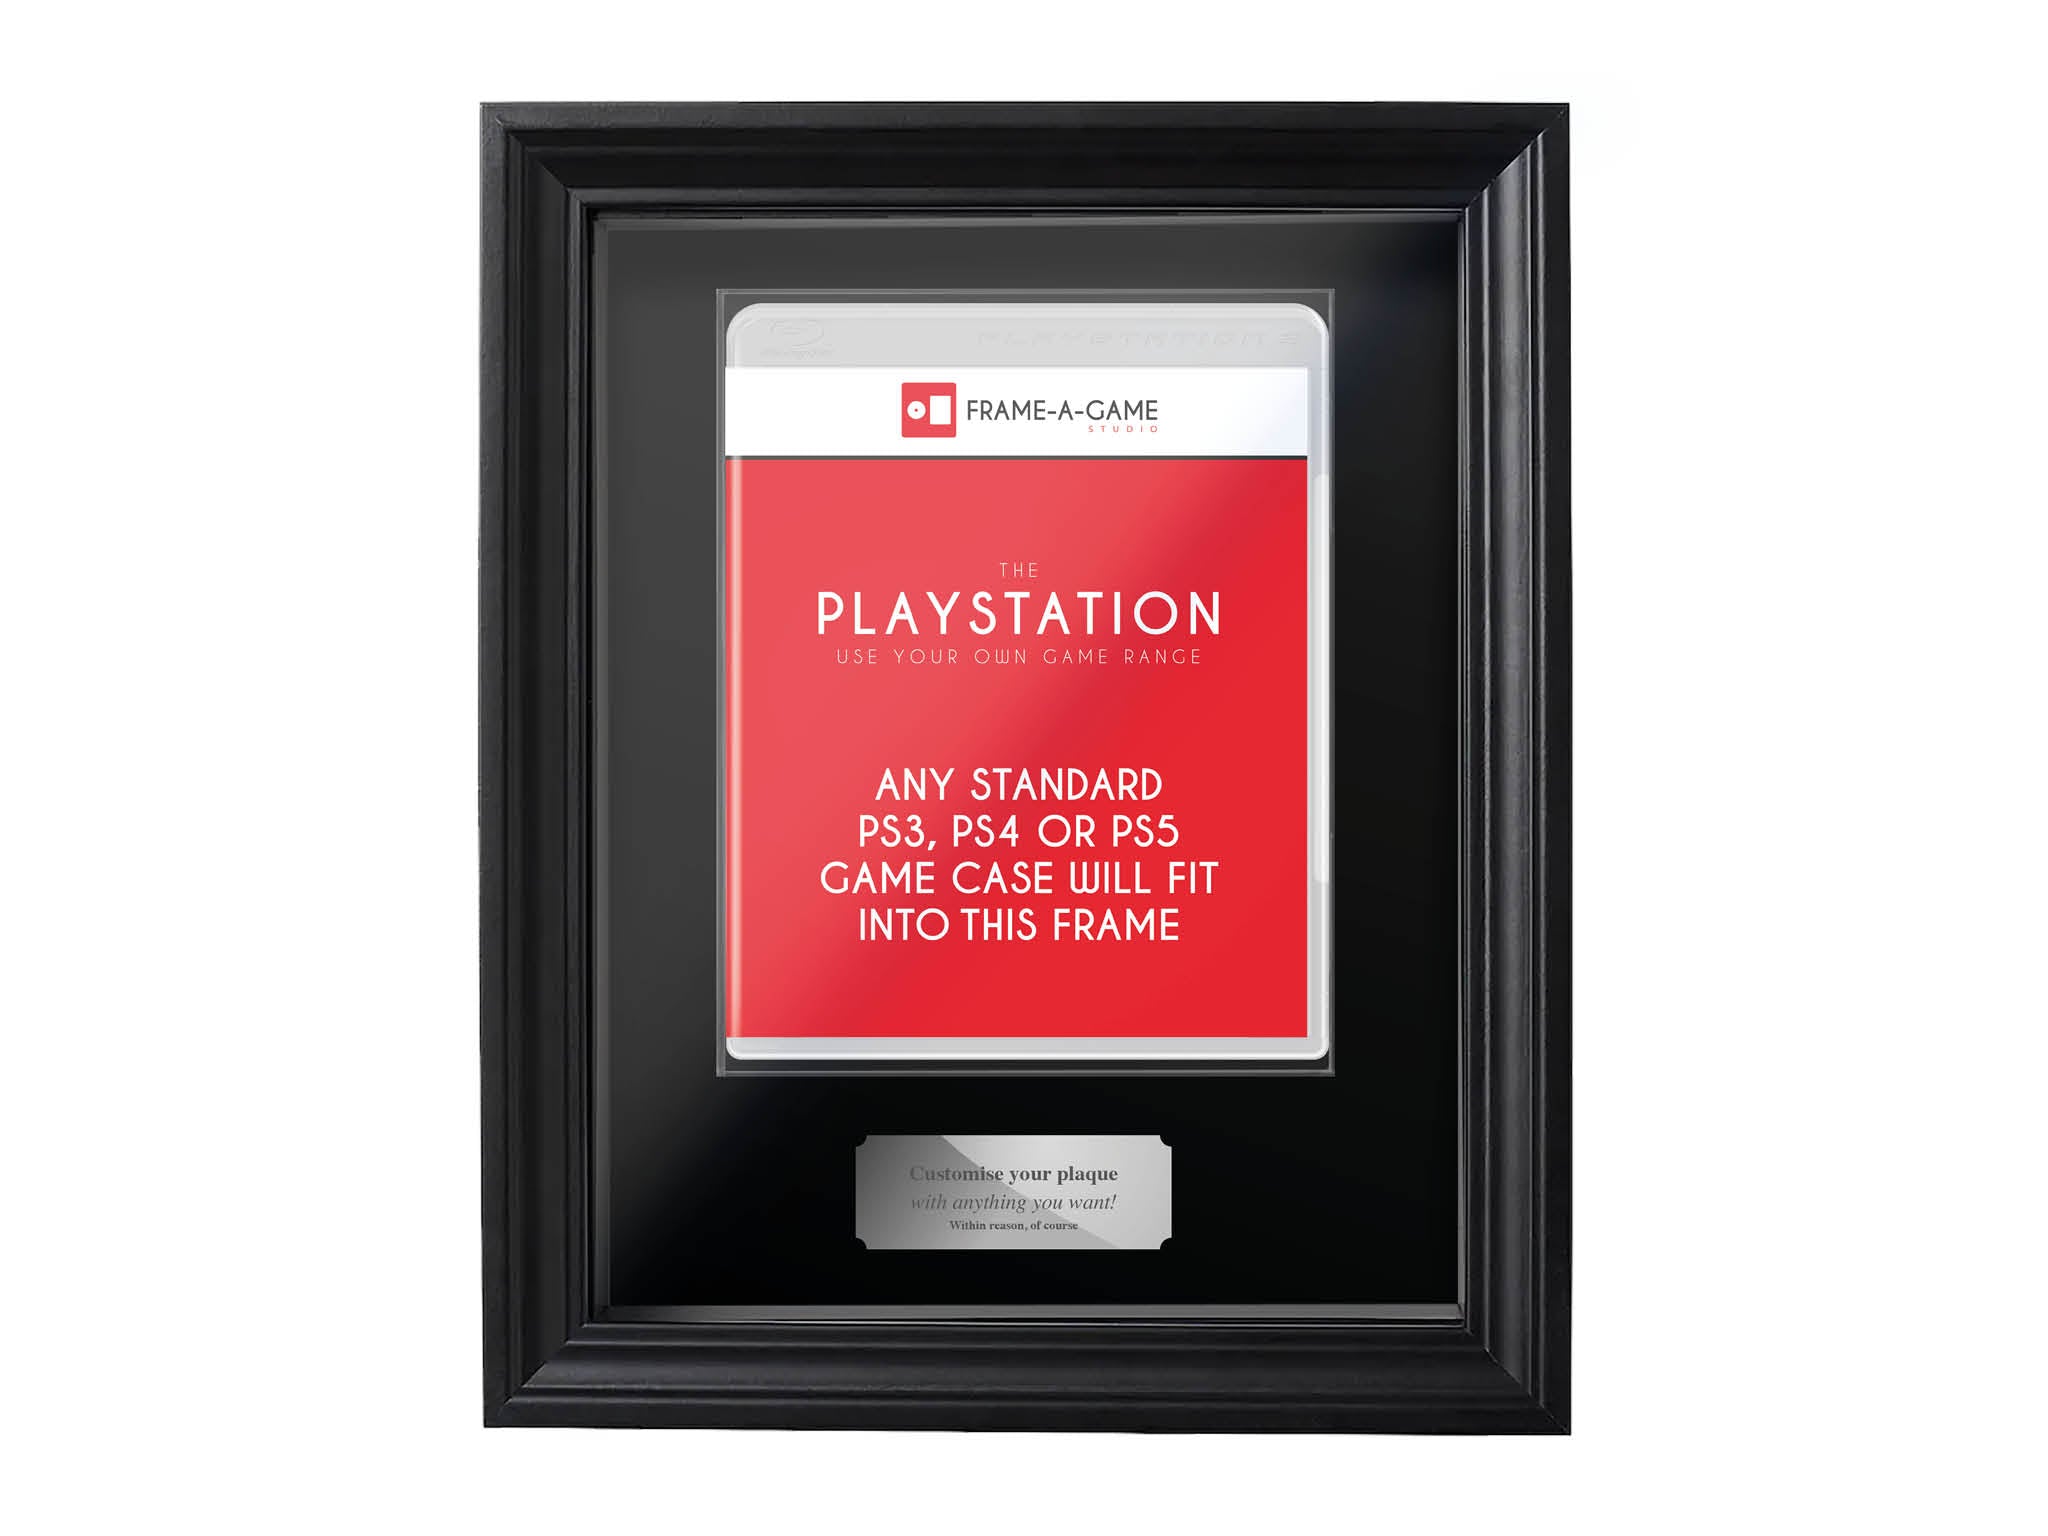 Use your own game (PS3) Showcase Range Frame - Frame-A-Game